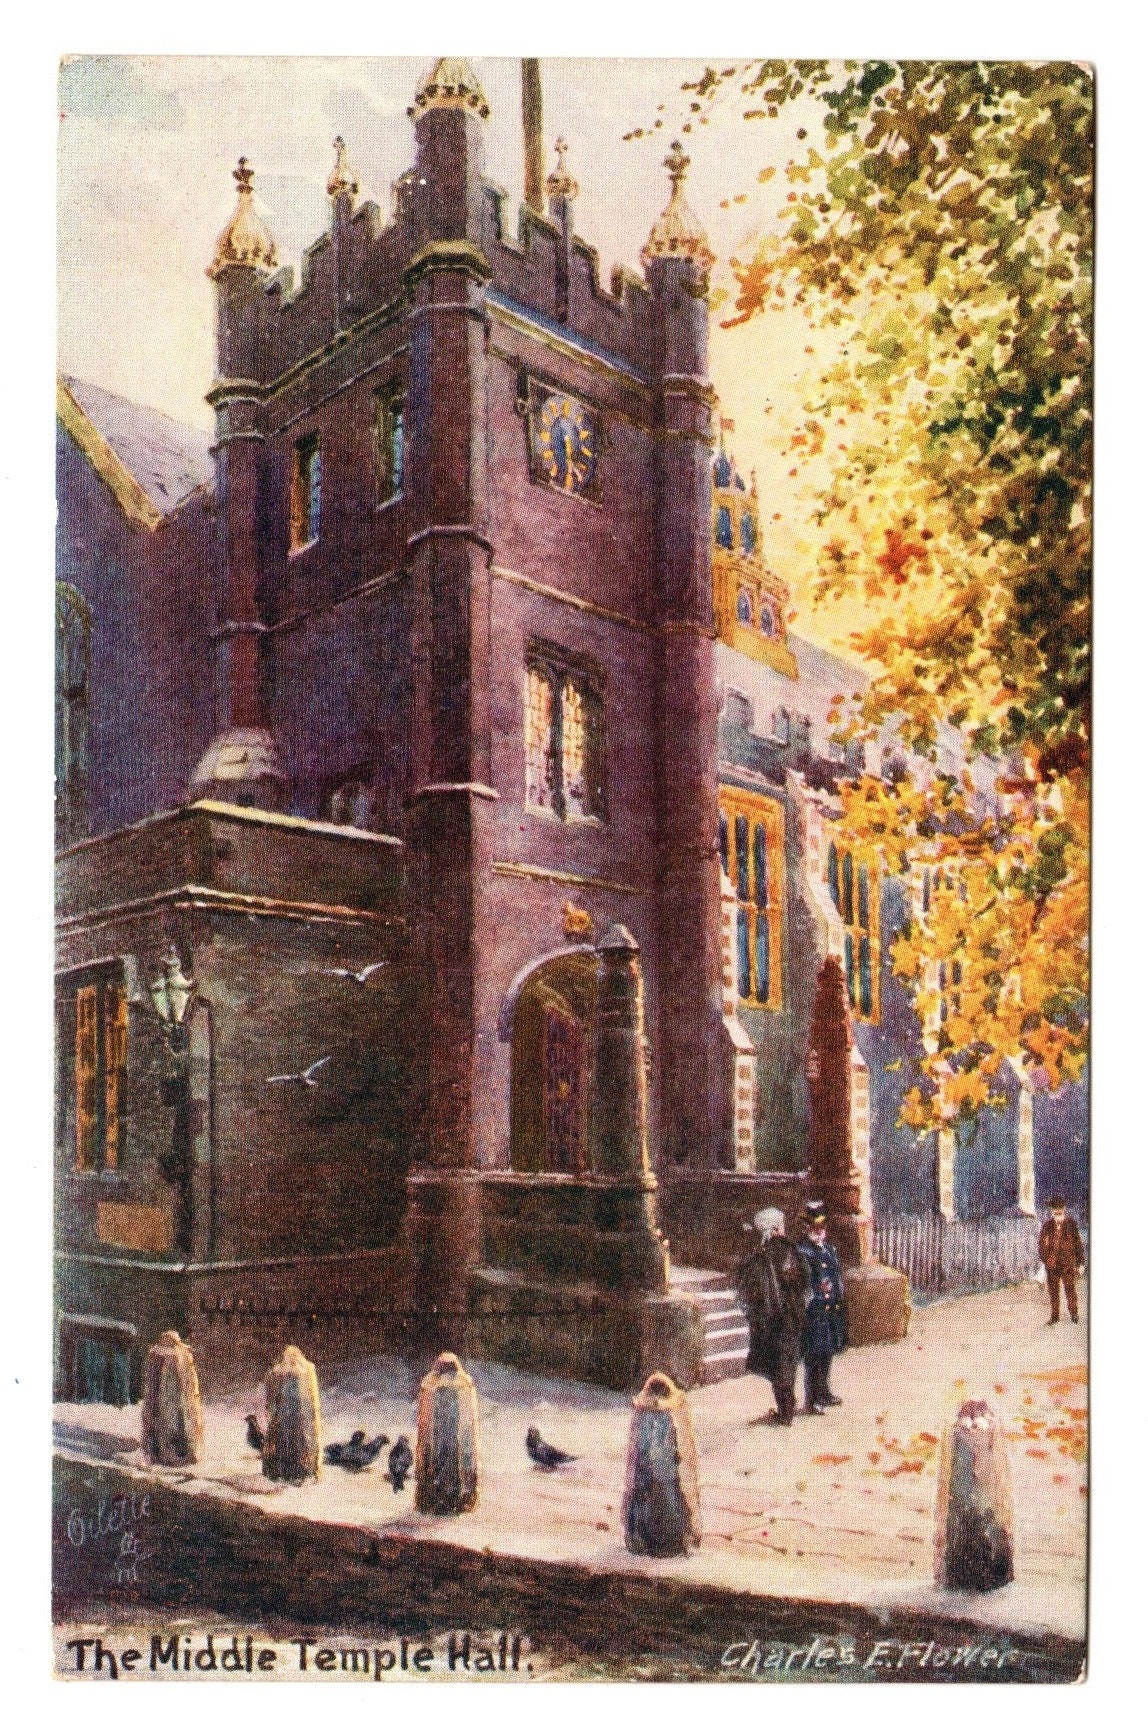 By Charles E Flower Raphael Tuck Pump Court 2 London England Postcards Series Number 8653-15616Pa Middle Temple Hall